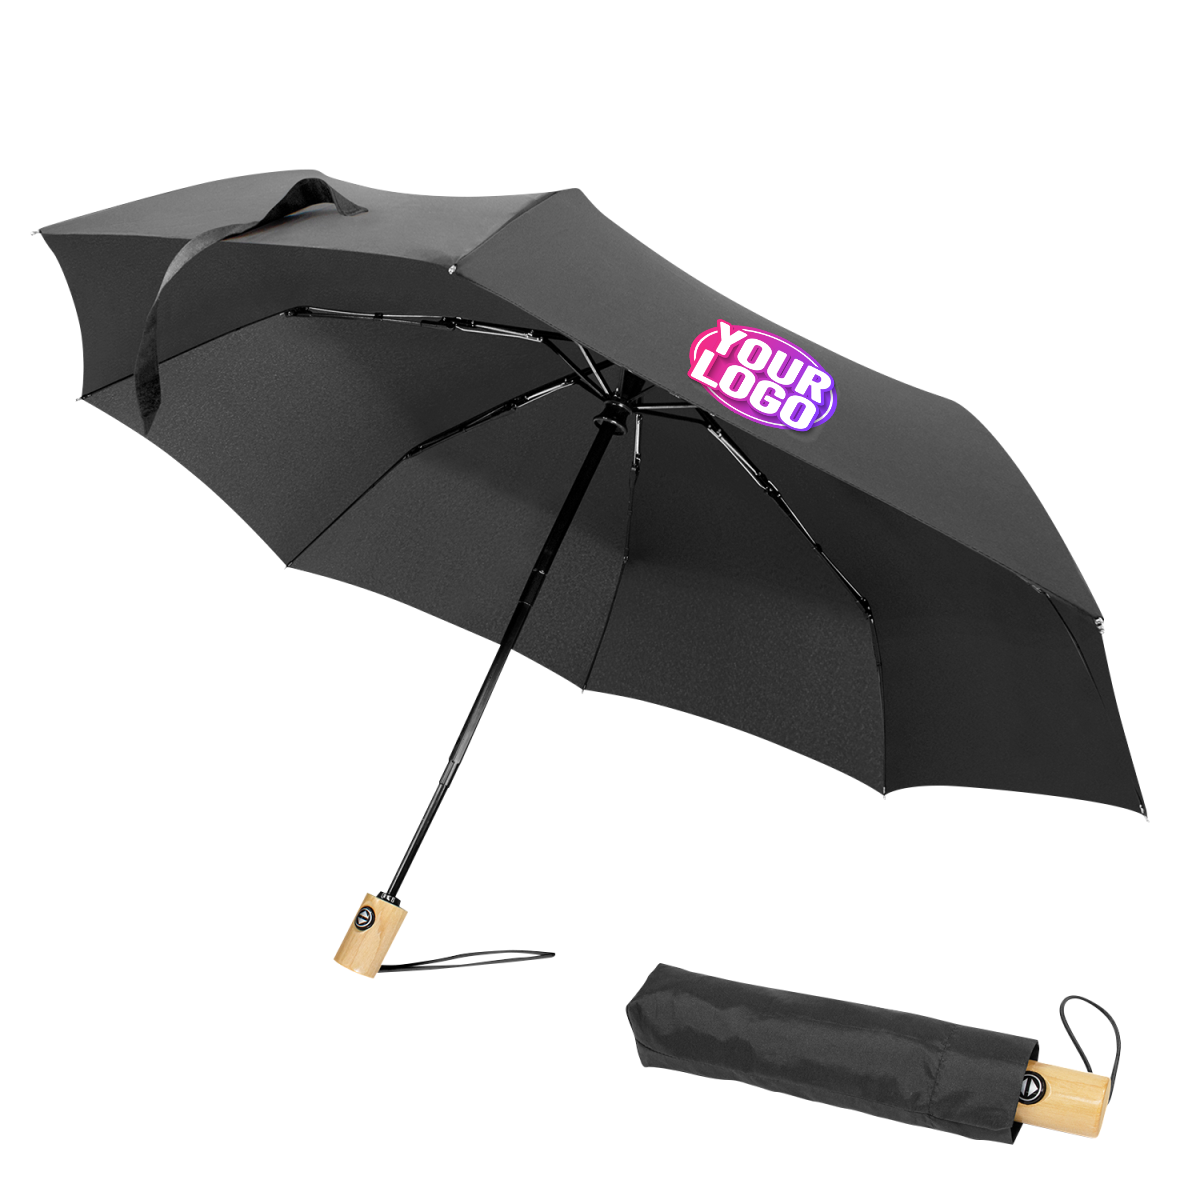 CUSTOM BRANDED - STORM PROOF ECO®️  (RPET) Personal Compact Travel Umbrella With Wind Proof Fibreglass Frame, Japanese Oak Handle & SMART Automatic Open/Close